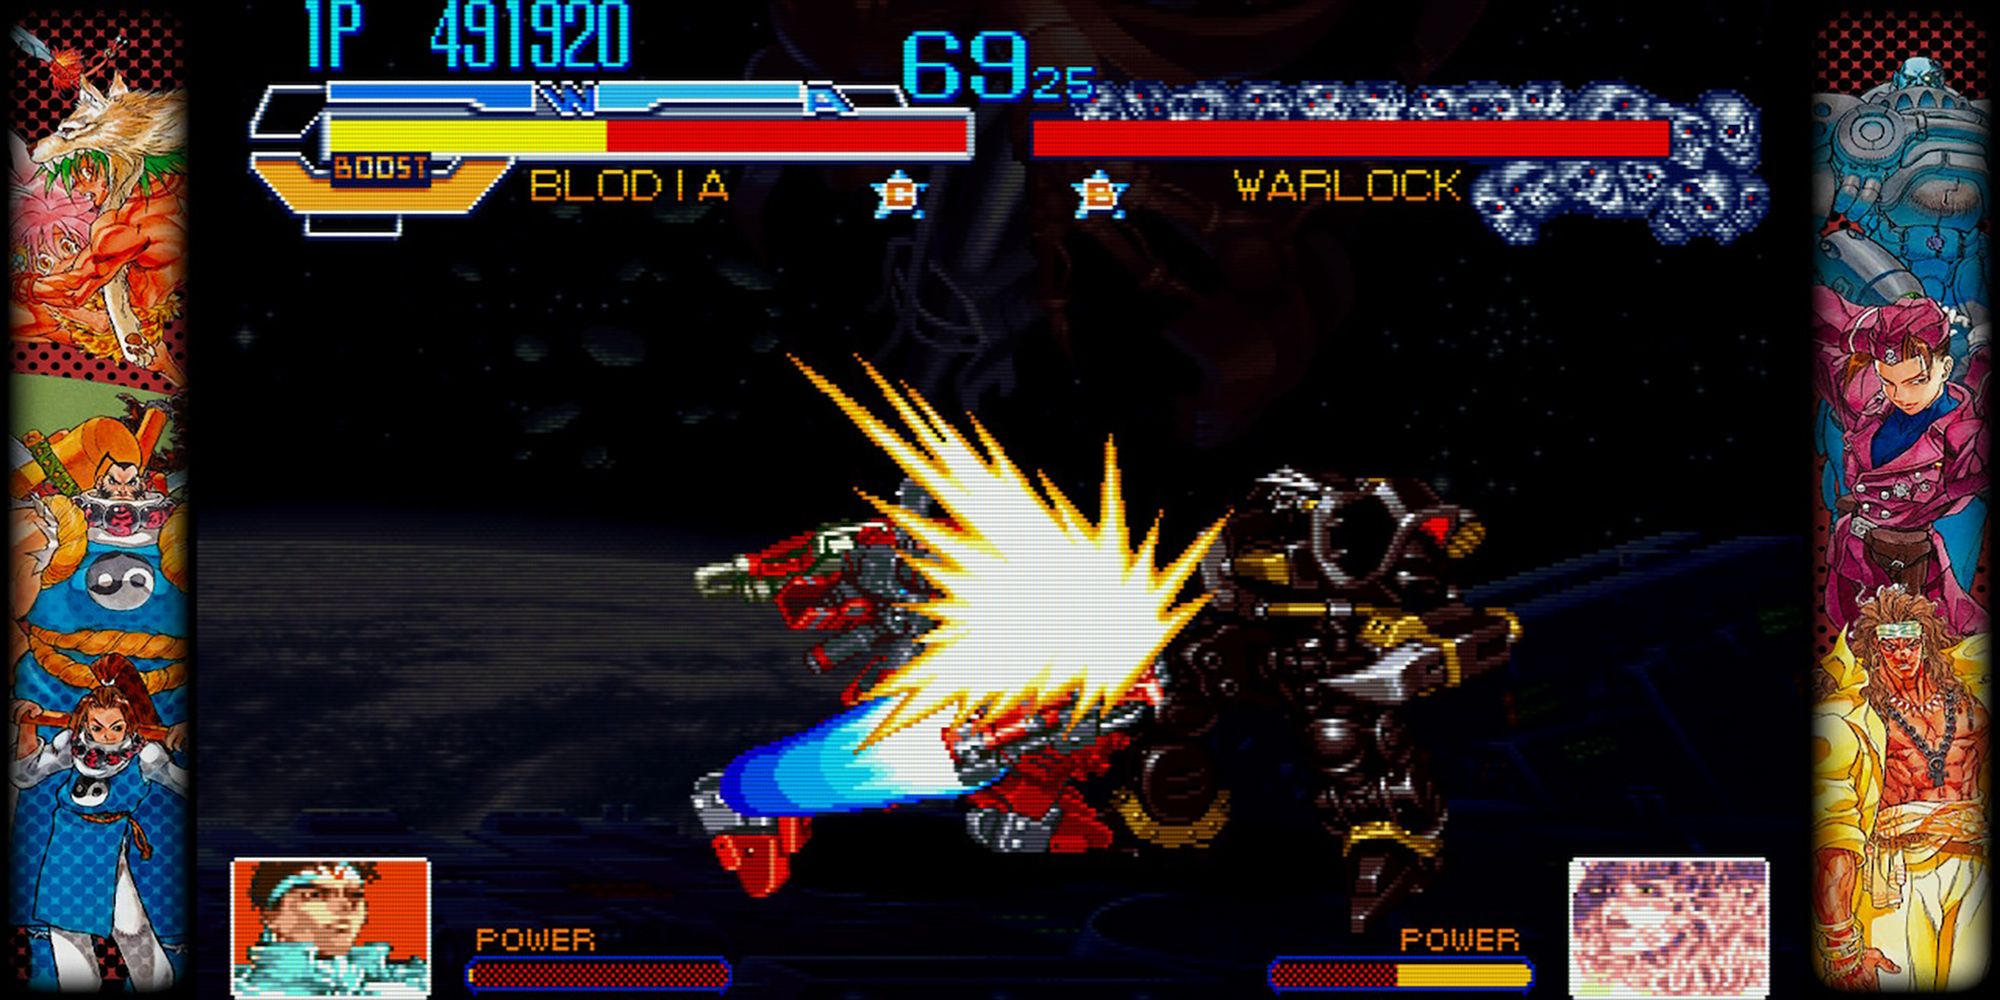 Jin's mech, Blodia, annihilates G.O.D.'s weapon, Warlock, with a Cyber EX attack in an epic space battle in Cyberbots. Capcom Fighting Collection.